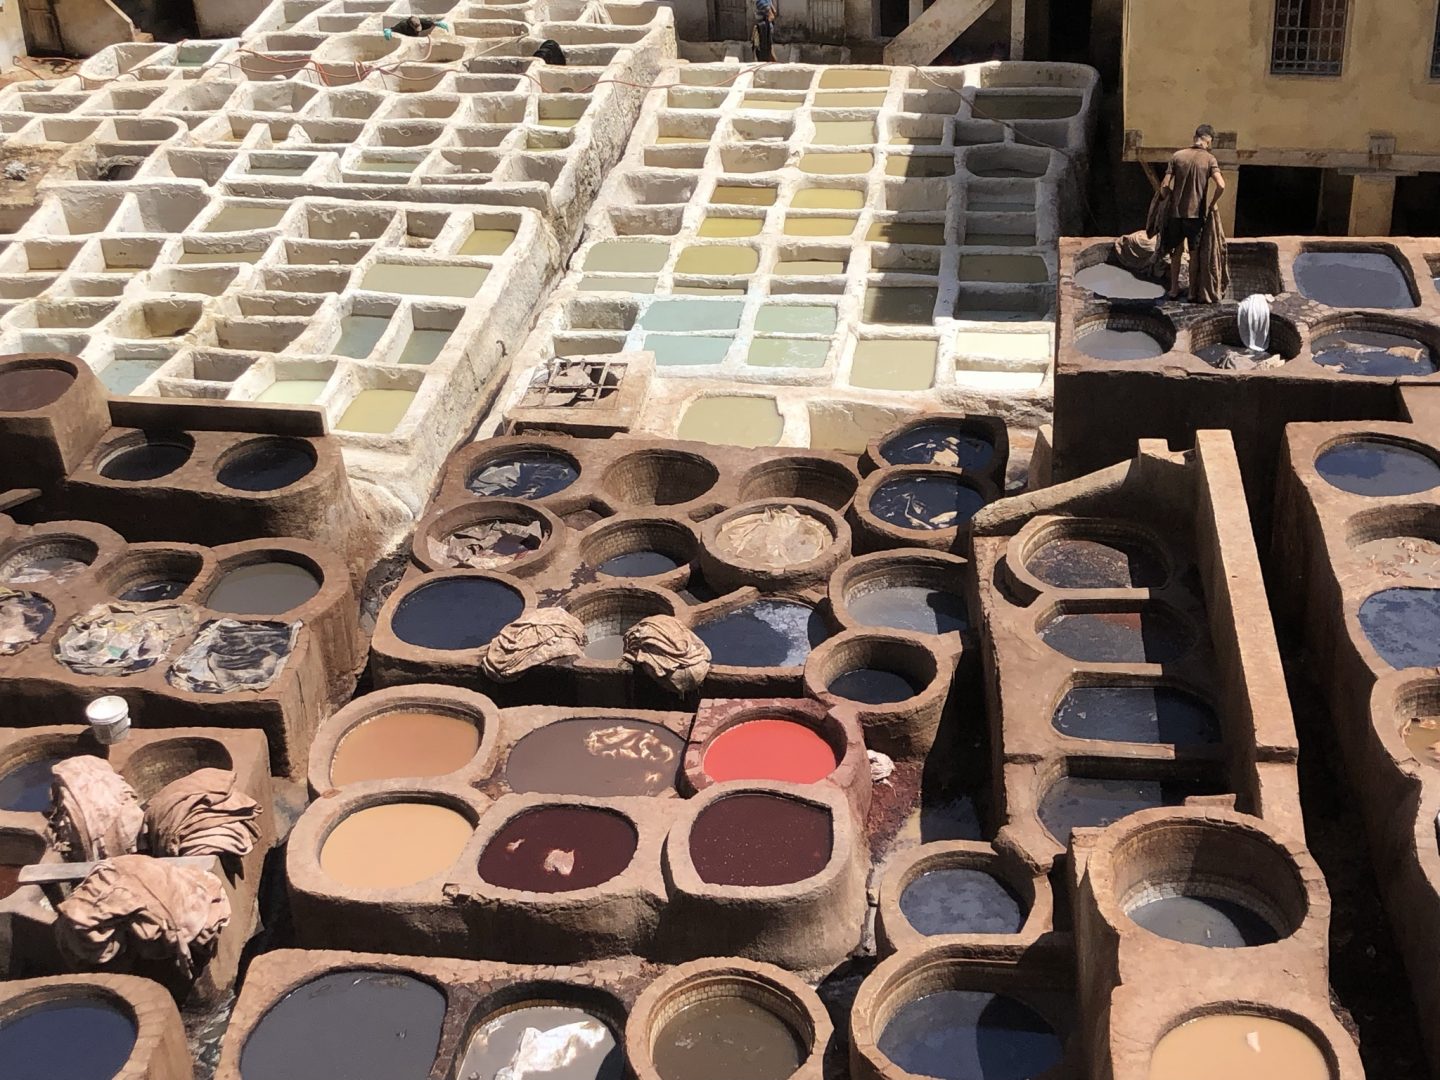 Leather dyeing in a traditional tannery in the city of Fez, Morocco.